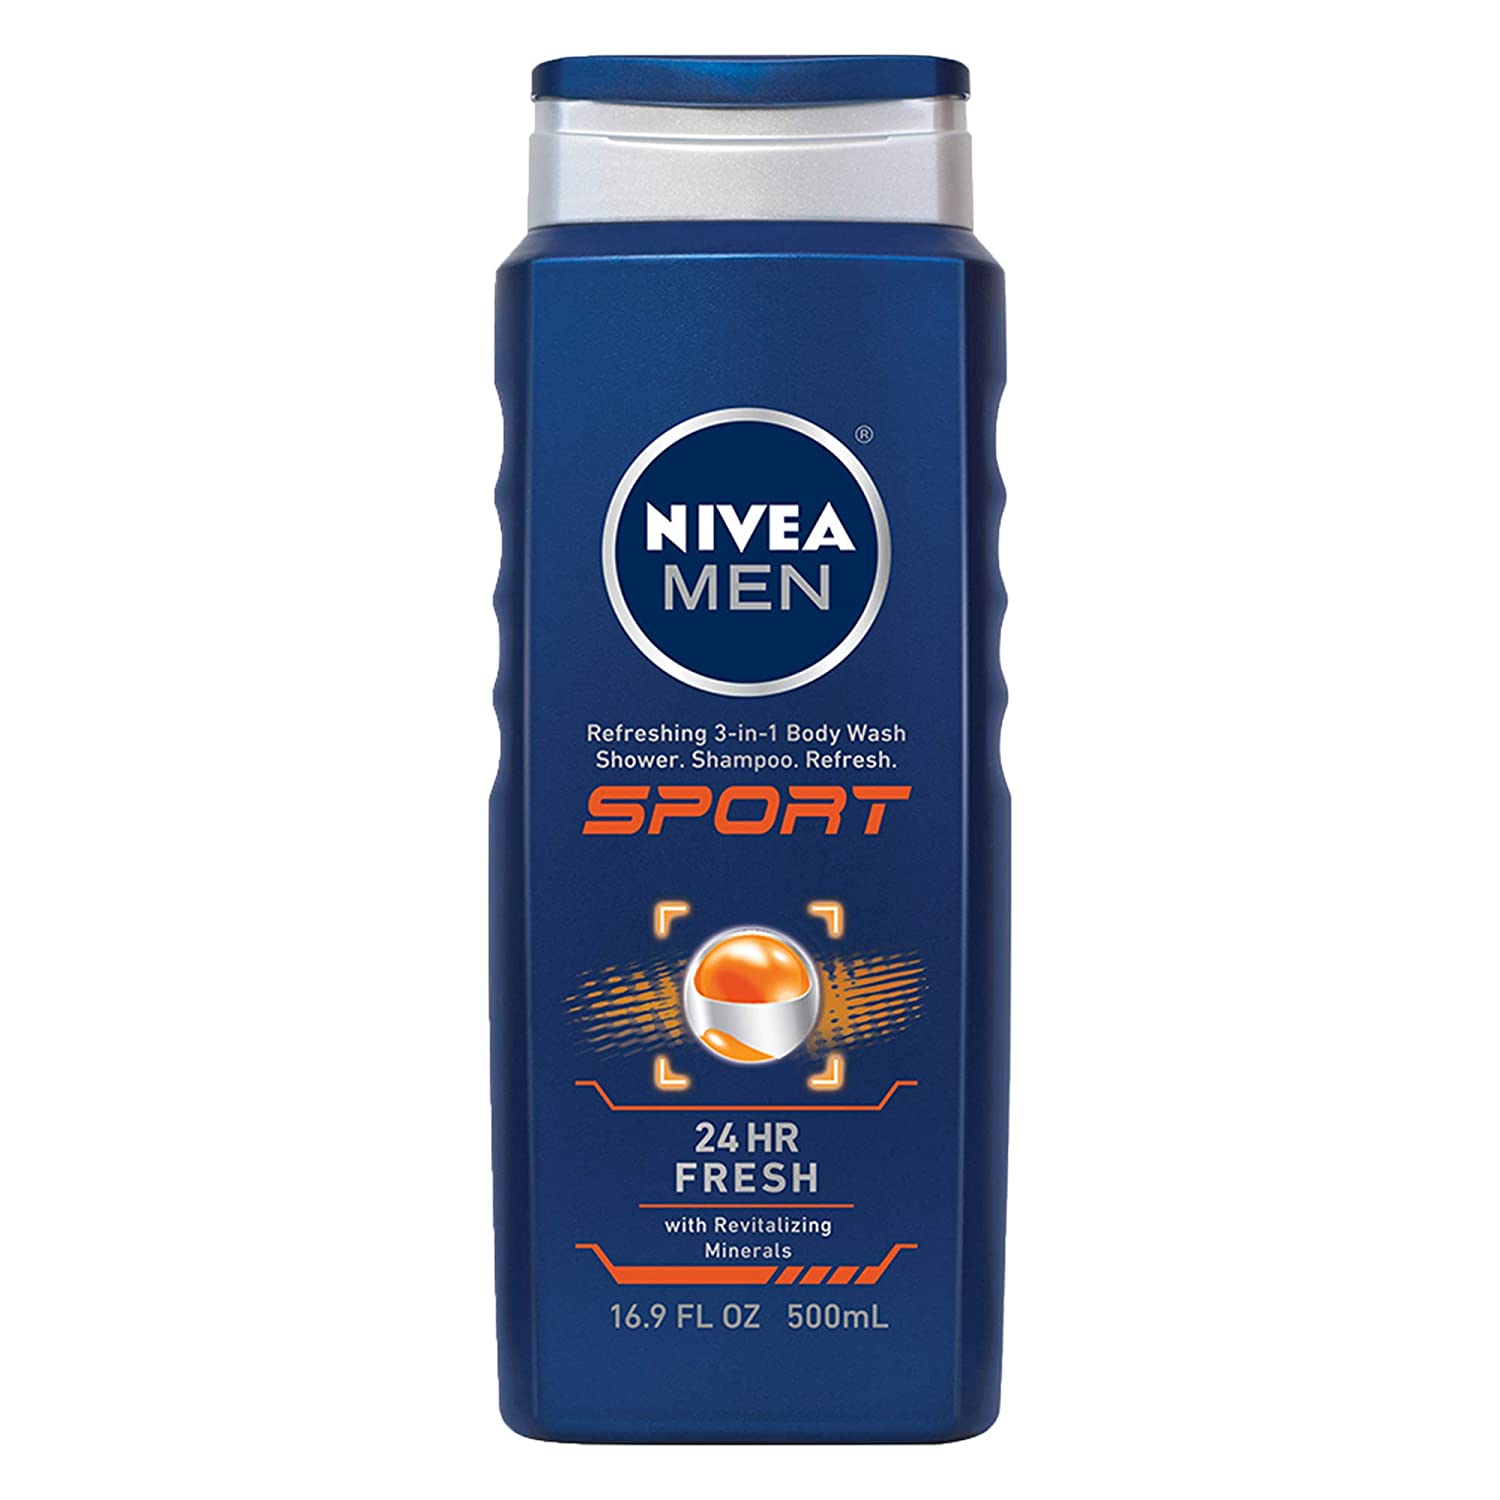 16.9oz Nivea for Men 3-in-1 Body Wash (Sport) $2.62 w/ S&S + Free Shipping w/ Prime or on orders $25+